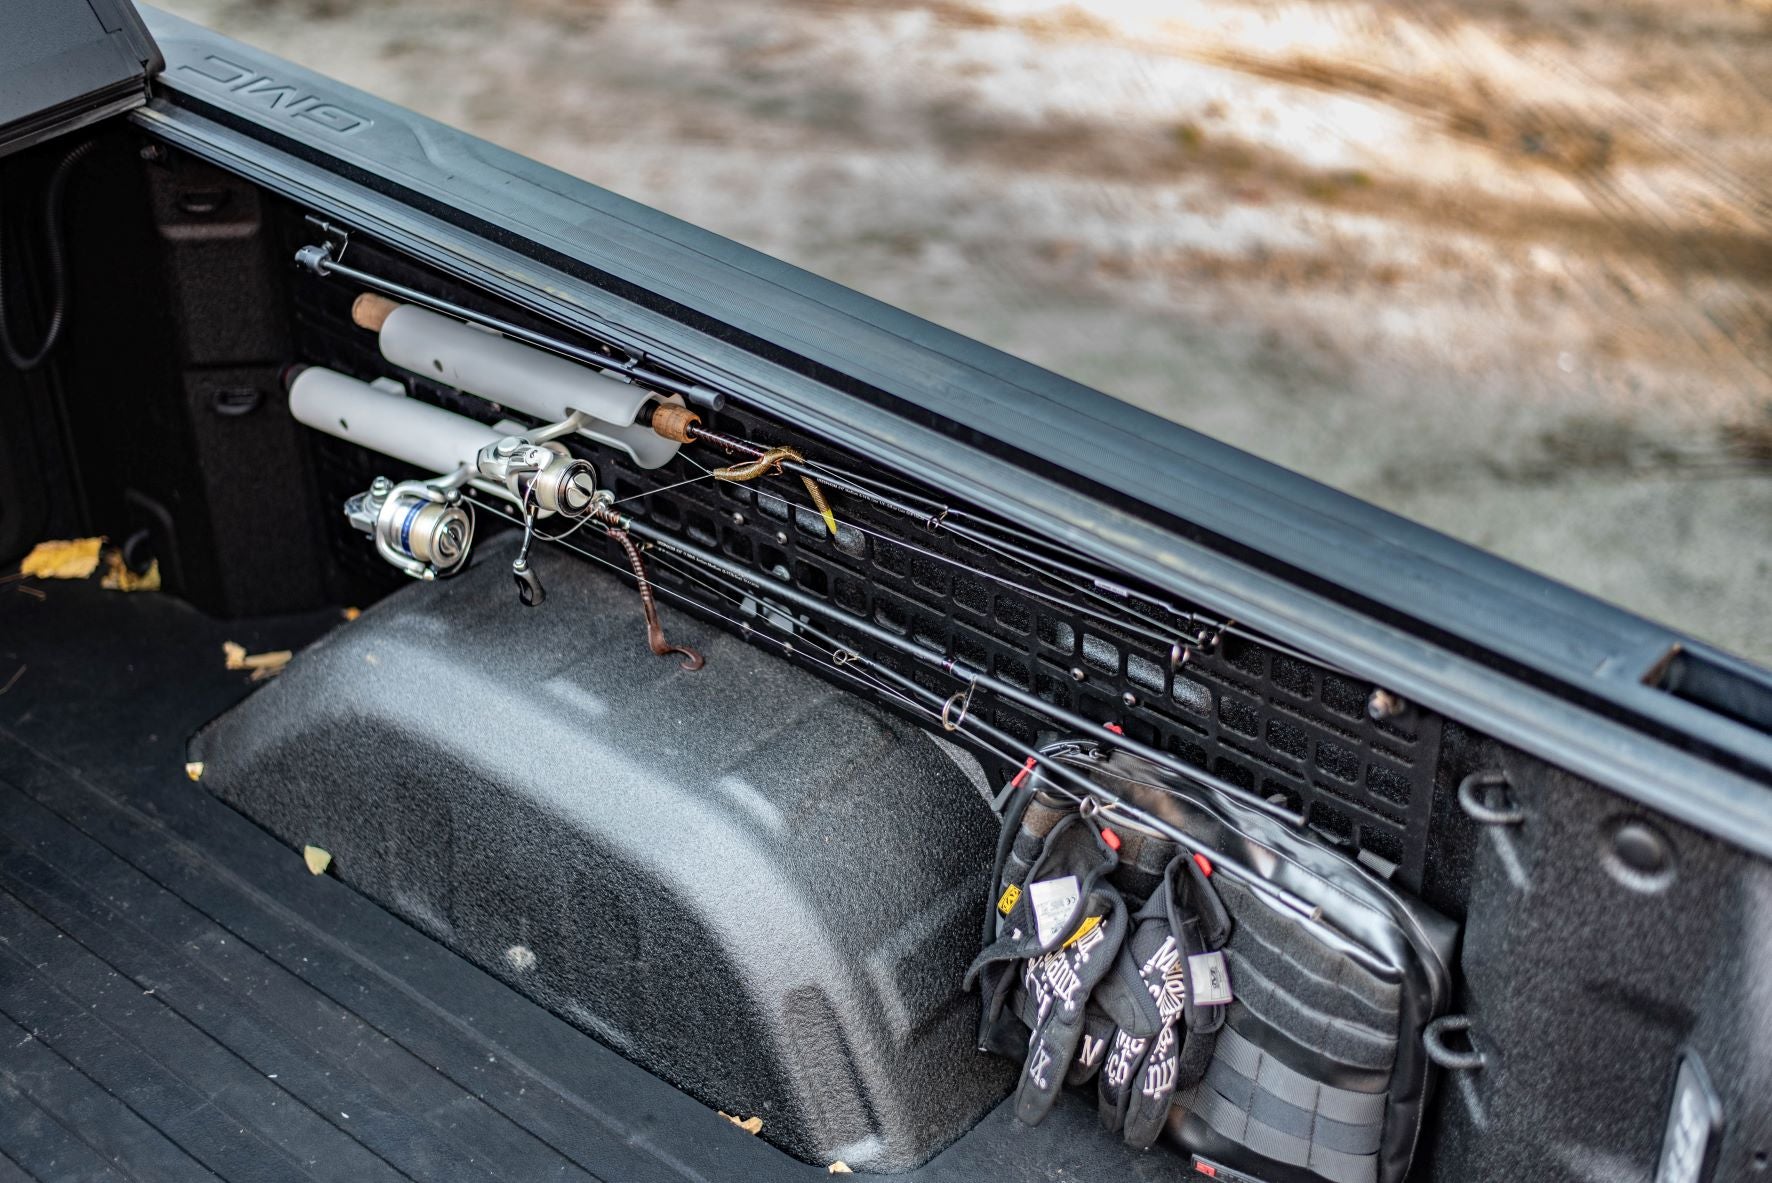 Truck Bed Organization - Fishing Rod Mounting - BuiltRight Industries